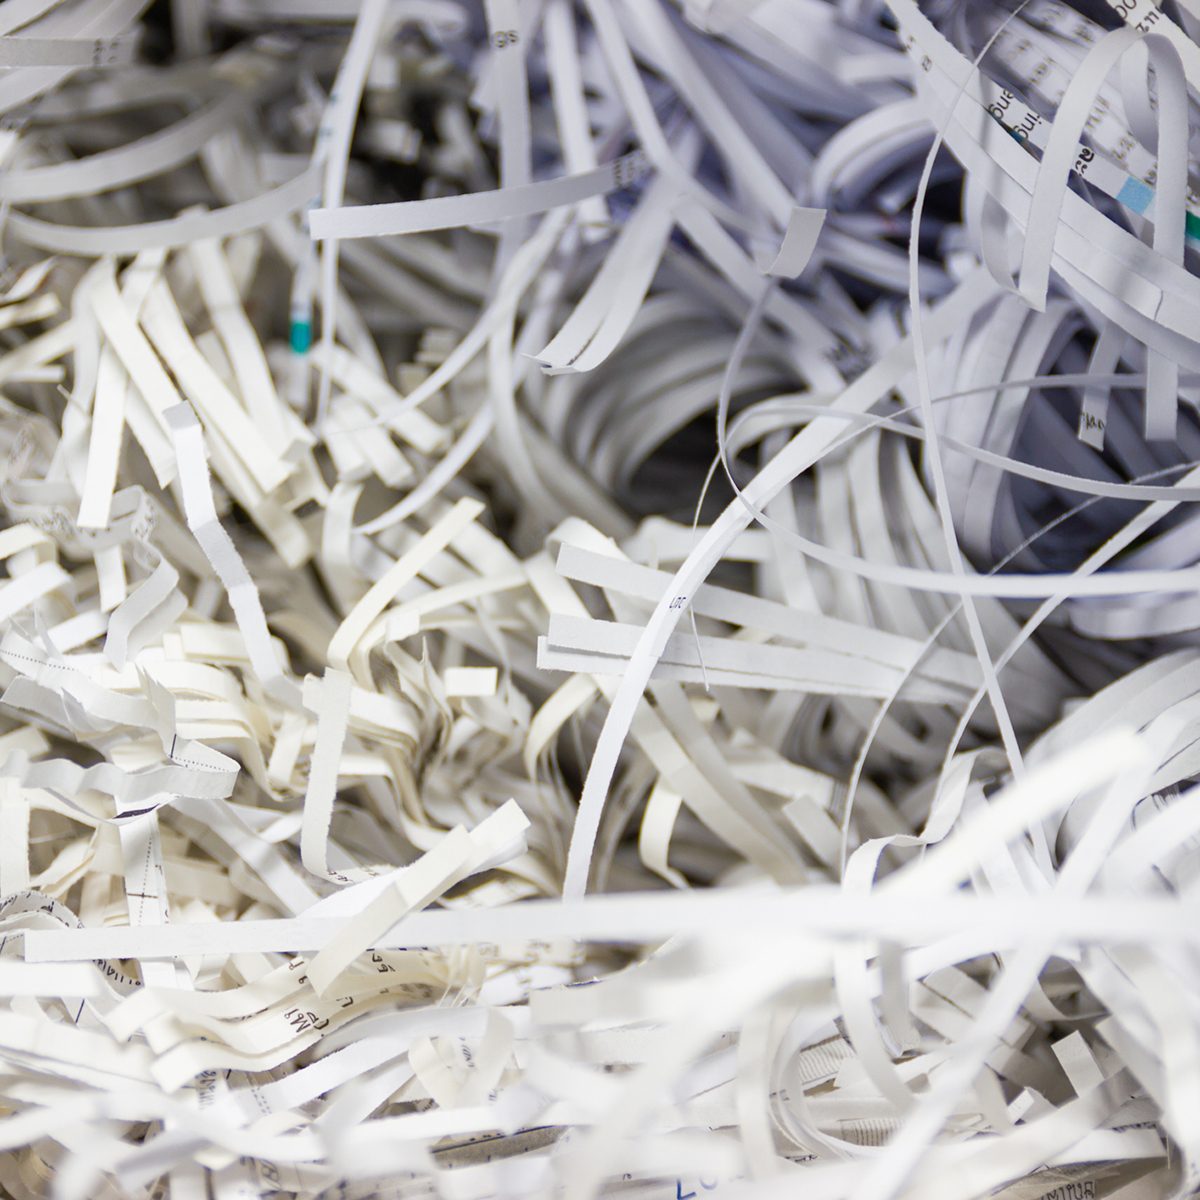 Closeup confidential information Strips of destroyed paper from a paper shredder